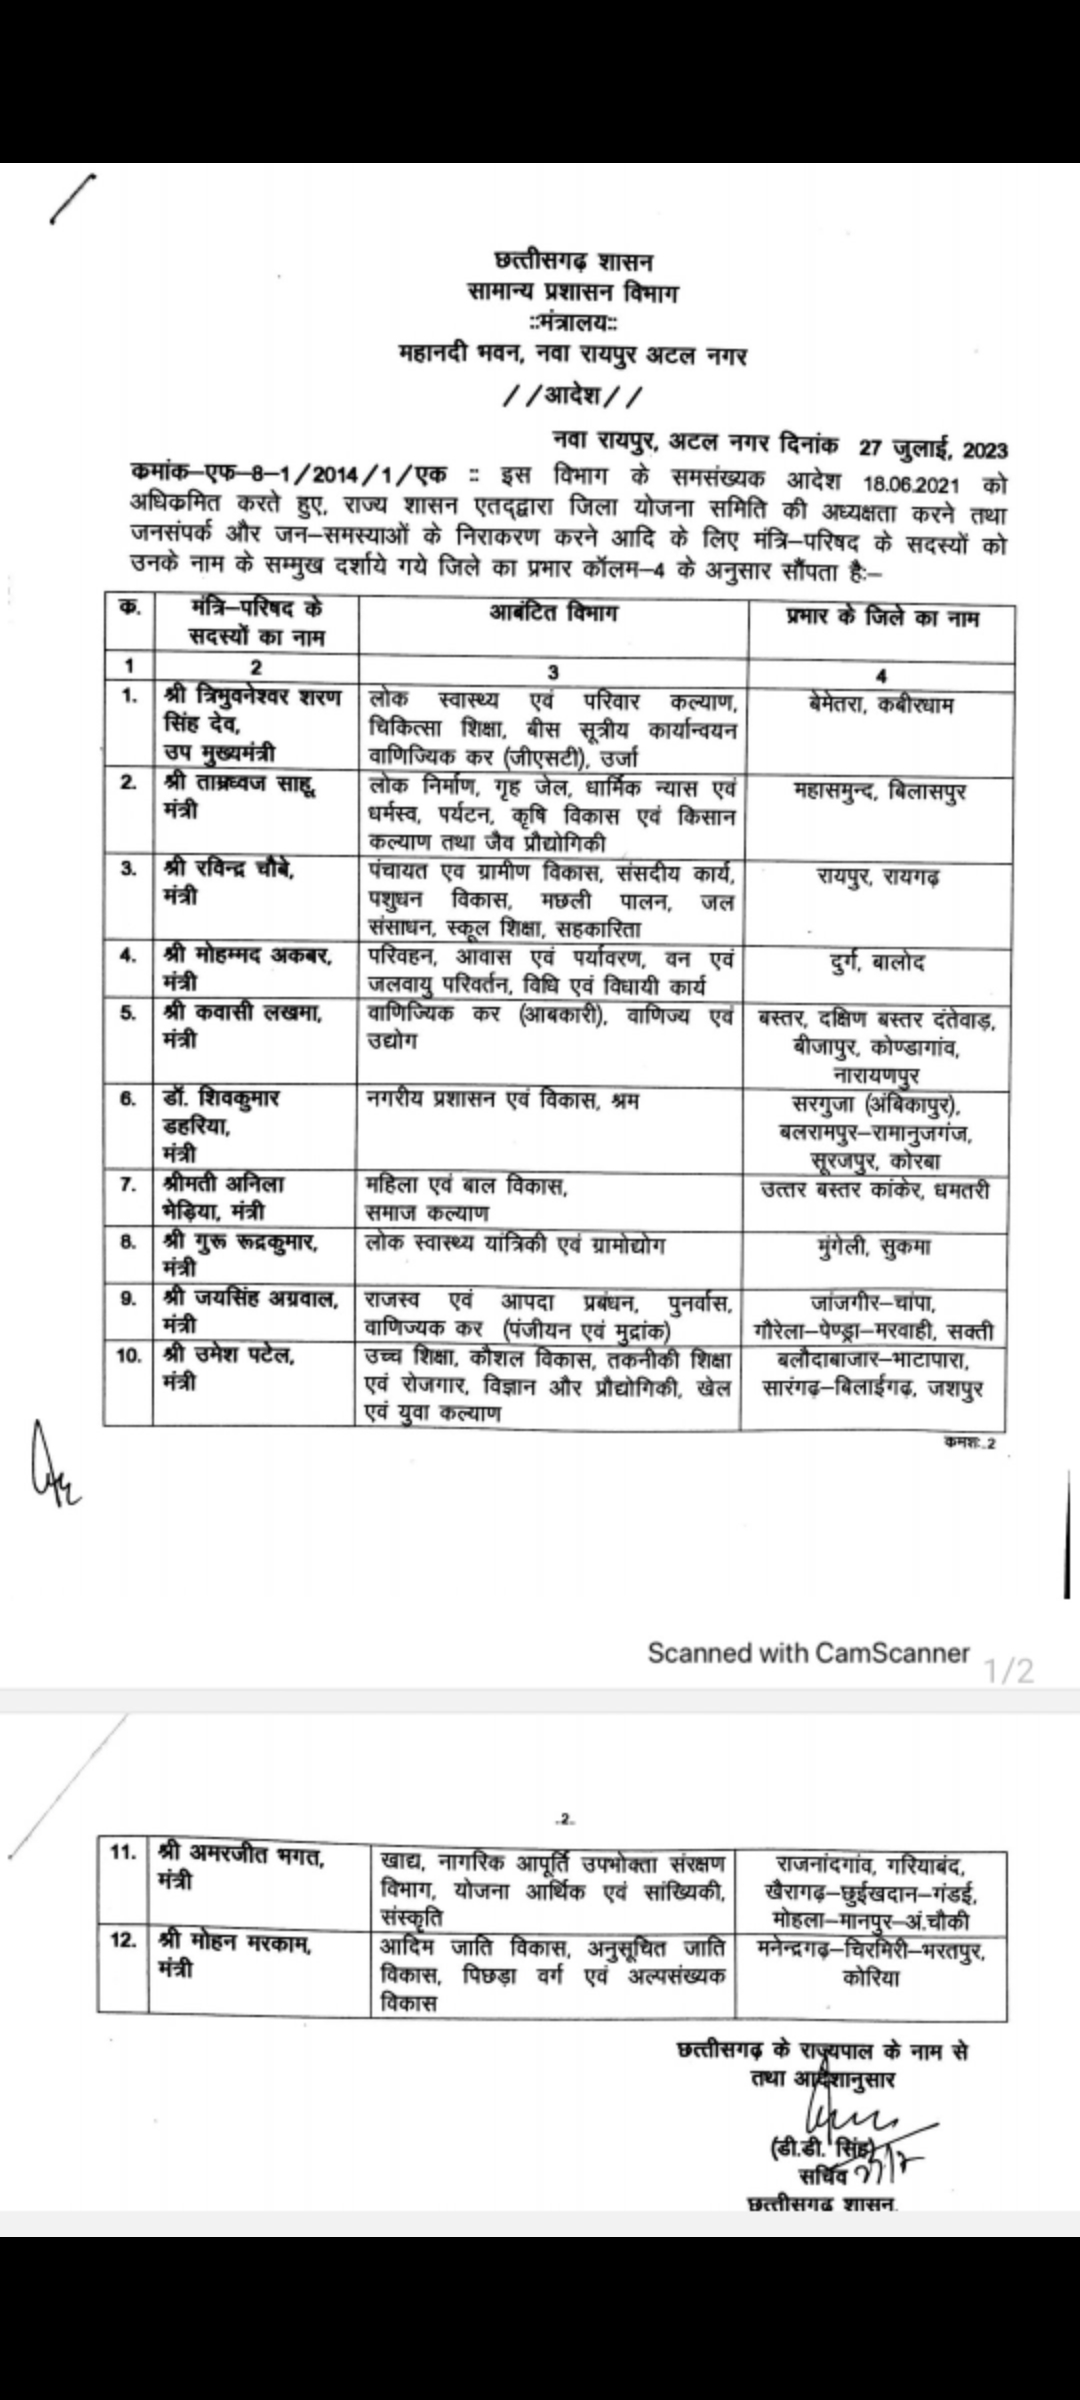 Ratan Lal Dangi became the new IG of Raipur, 6 IPS got new posting, State Government of Chhattisgarh, Indian Police Service, News,khabargali